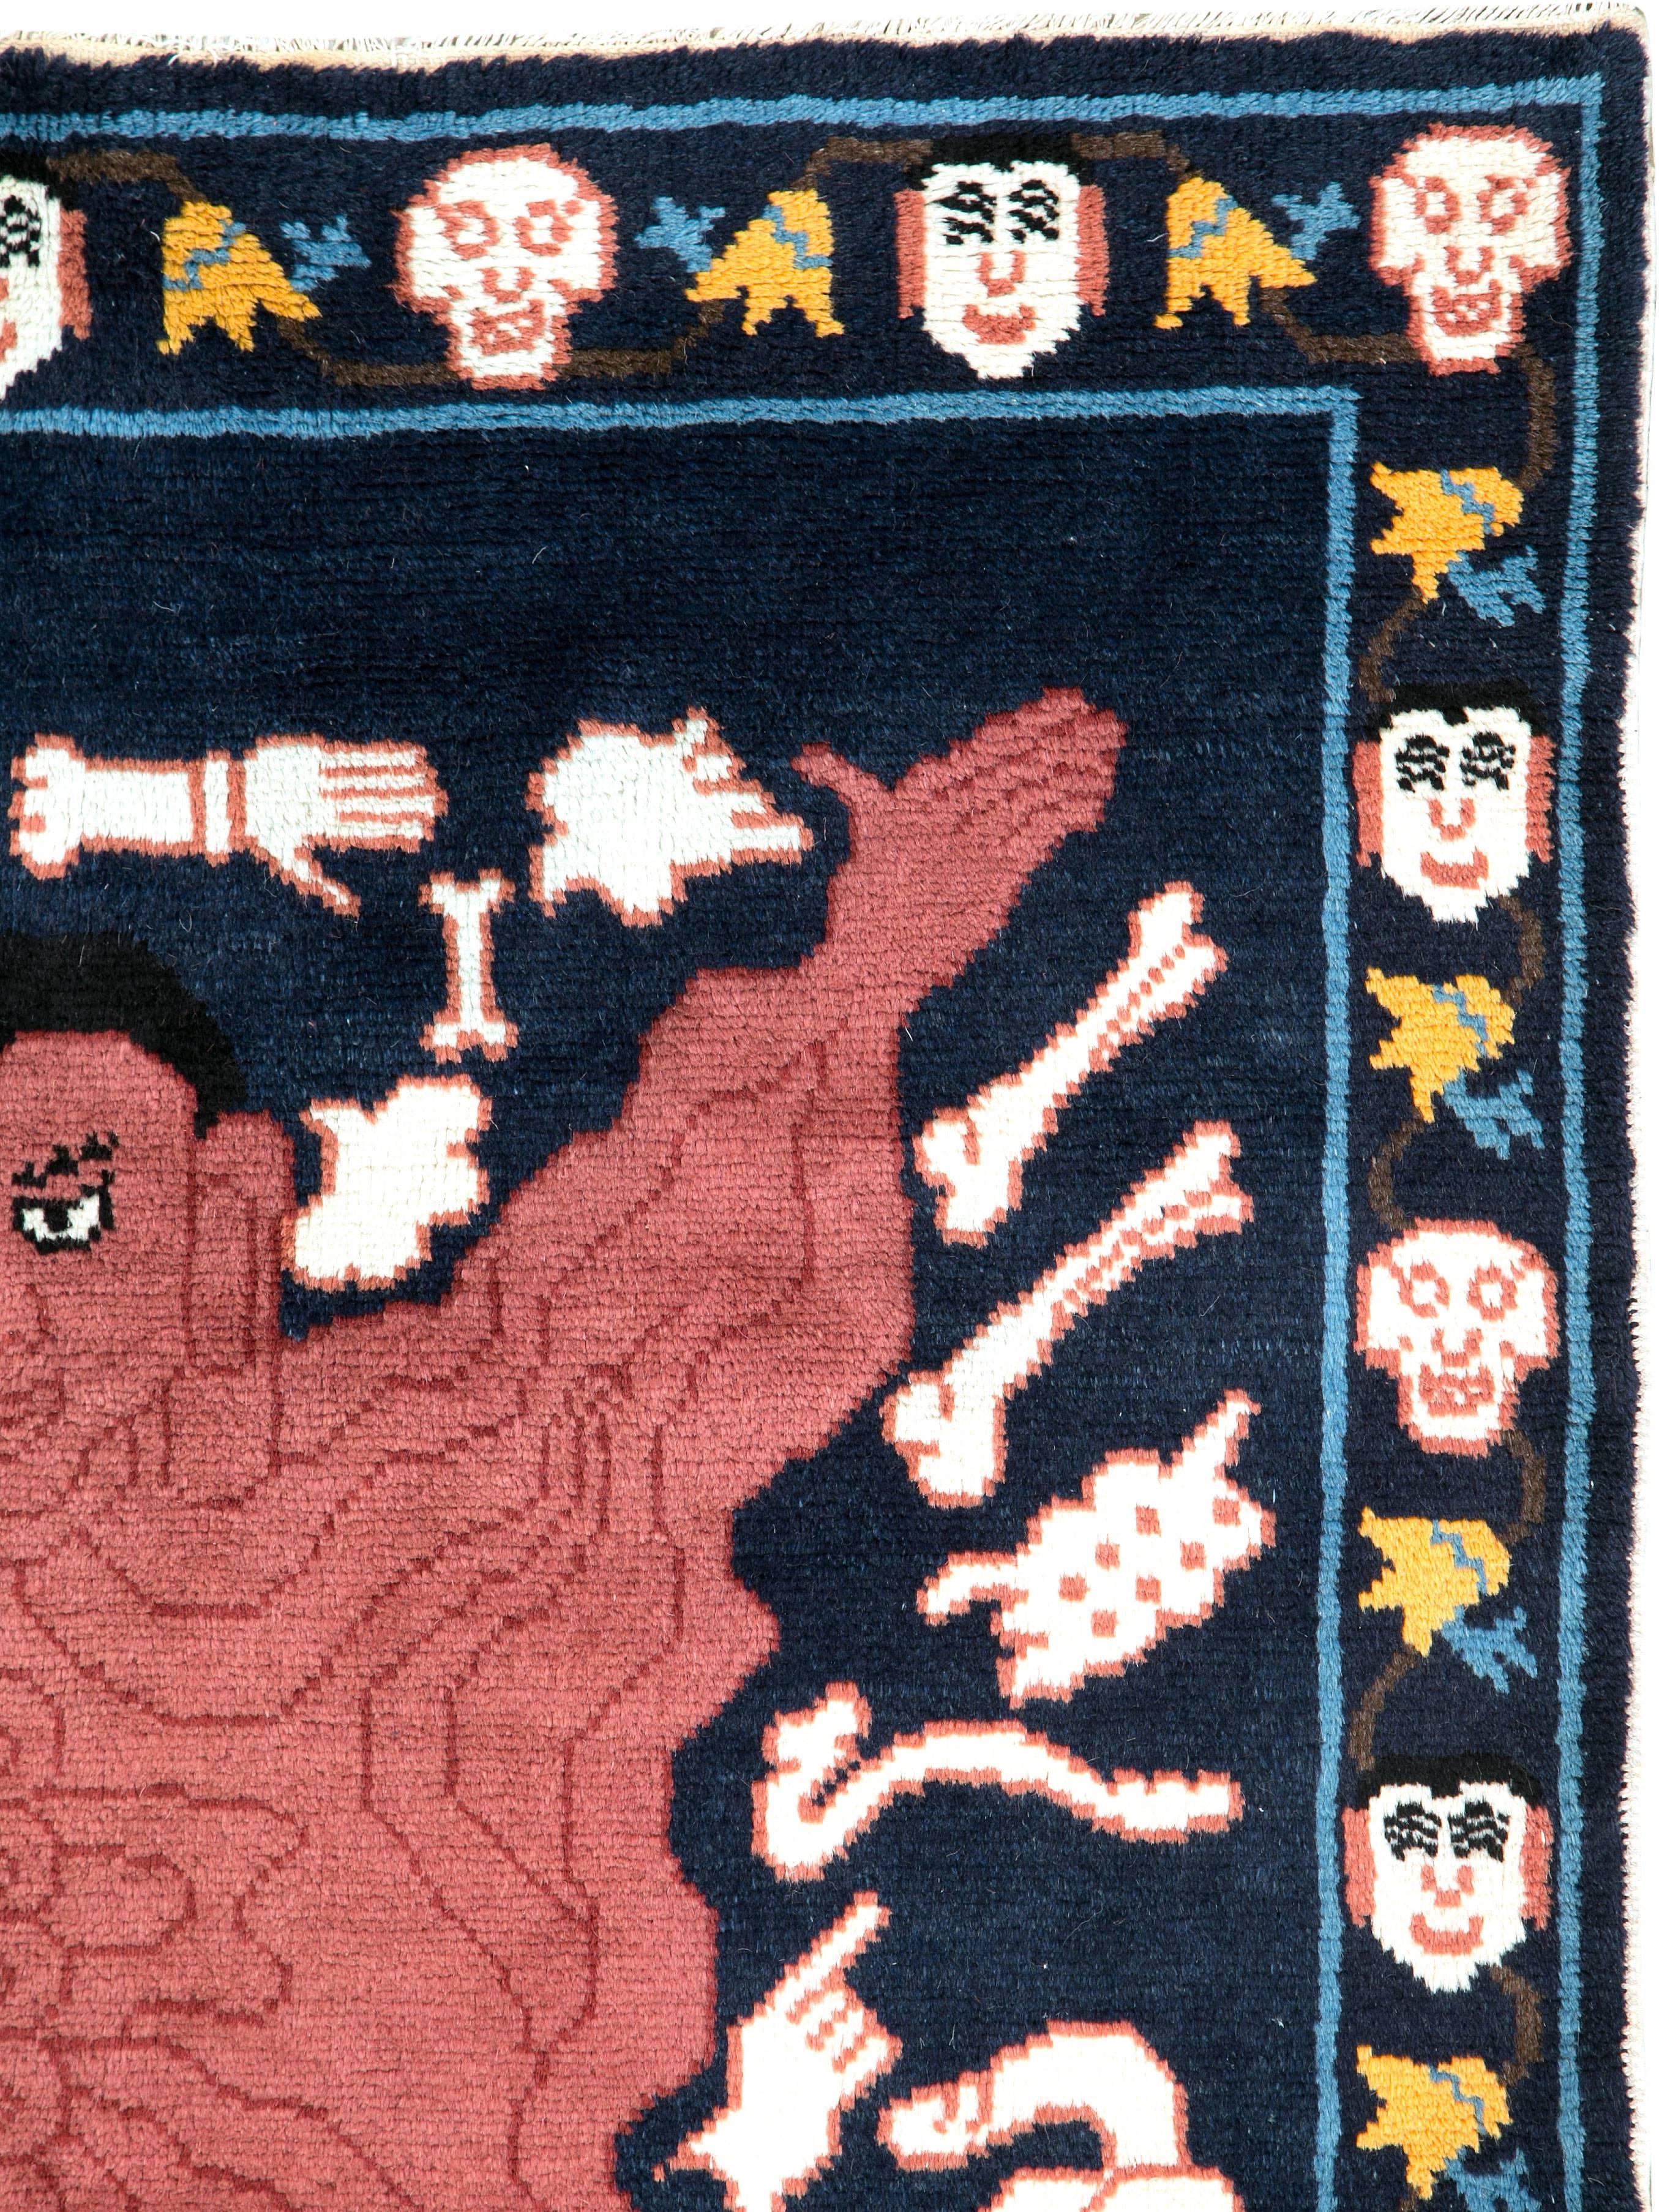 A vintage Tibetan Tantric carpet from the mid-20th century with a pictorial design of a flayed man. The macabre motif sits atop a deep blue field.

Employed by Vajrayana Buddhists as seats of power during the practice of esoteric rites associated